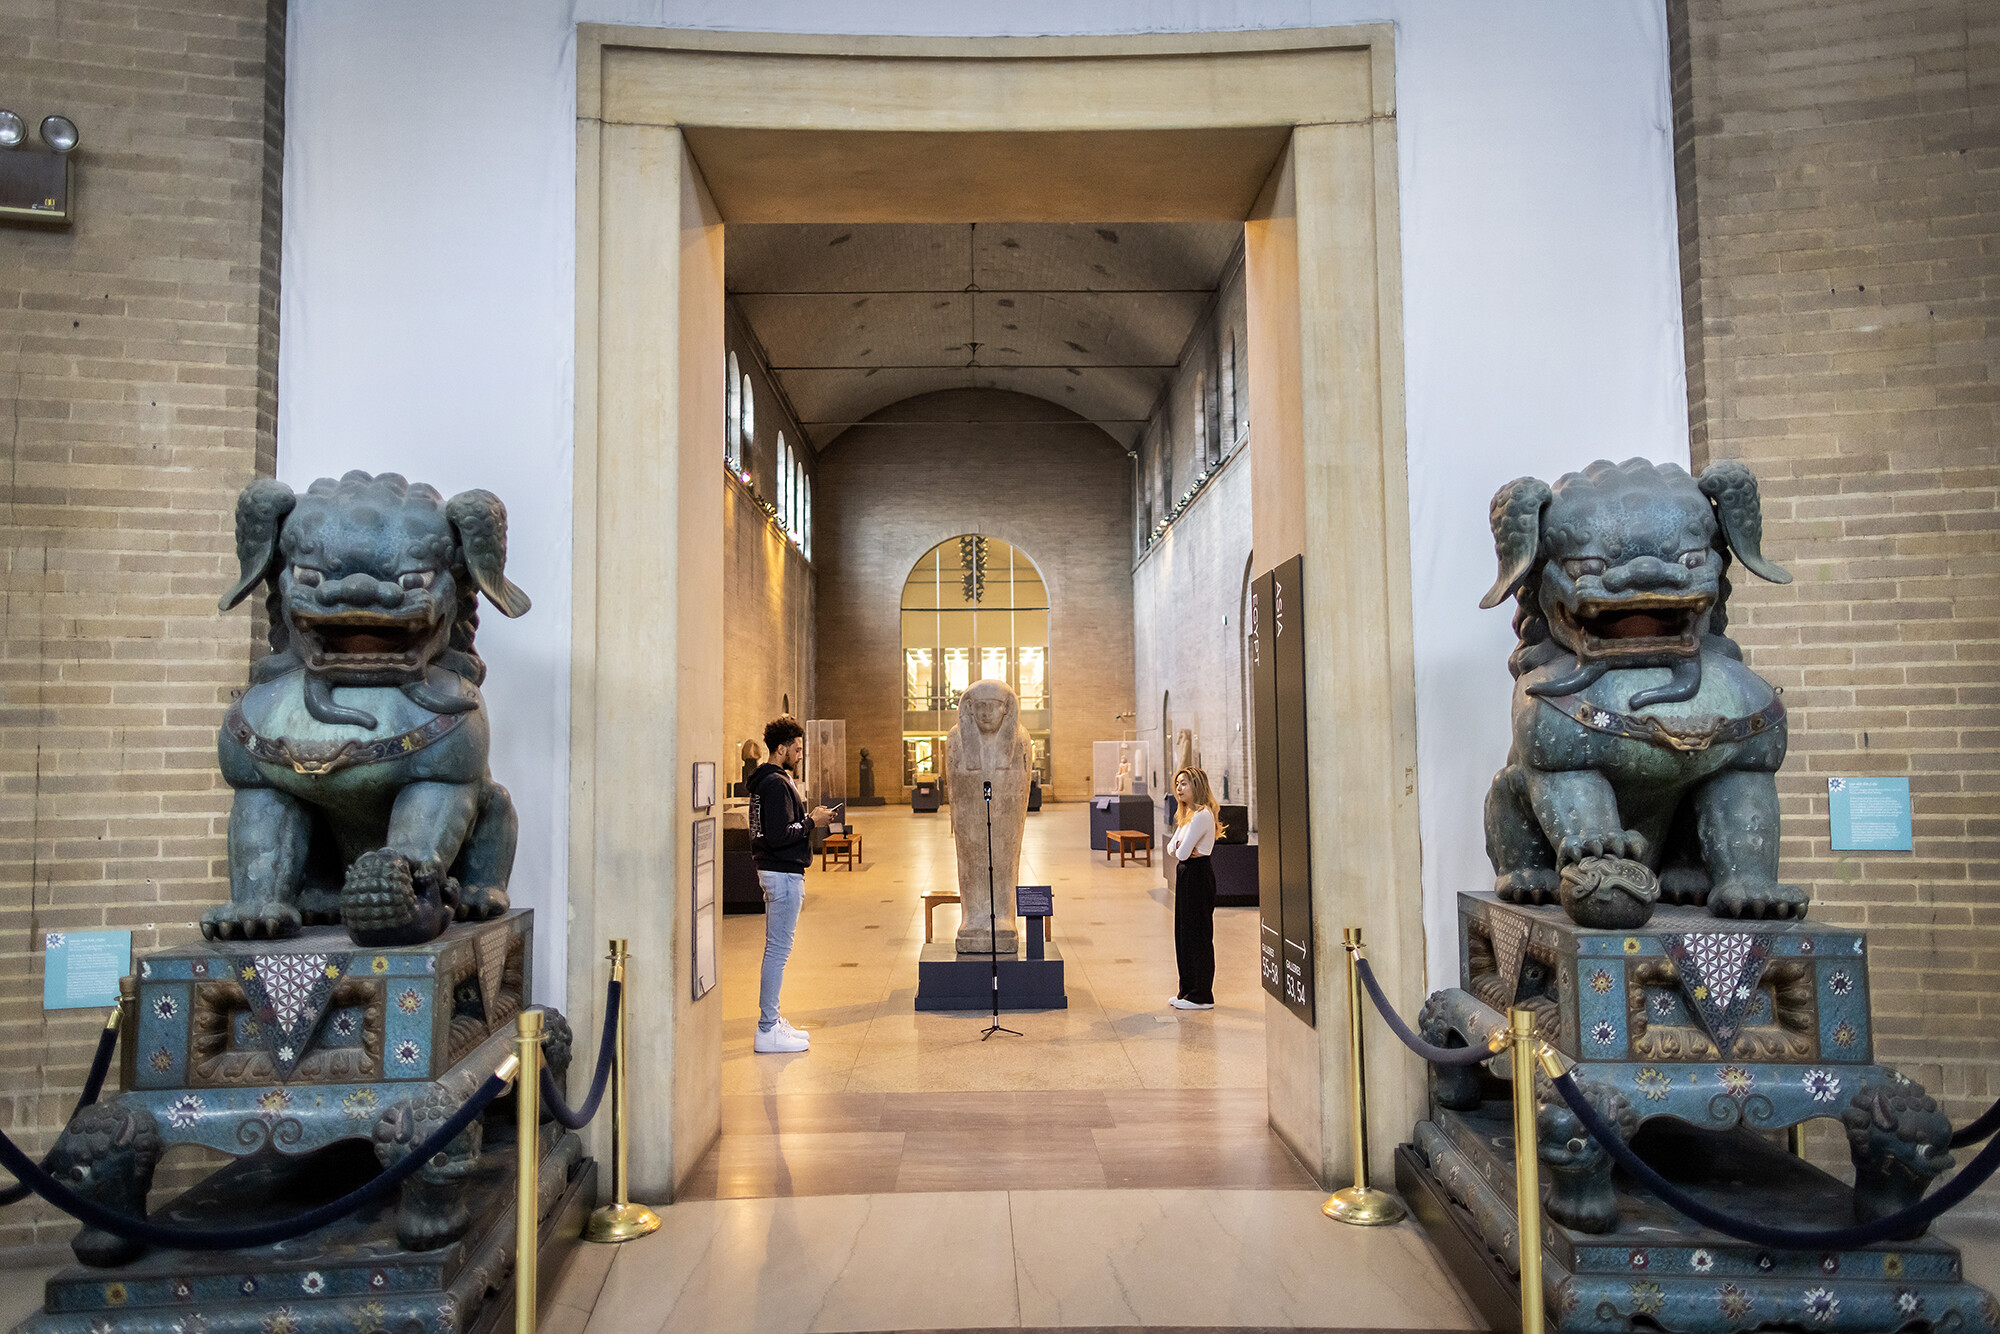 Two members of the VR class curator group standing in the Egyptian wing by an entrance with two identical statues.